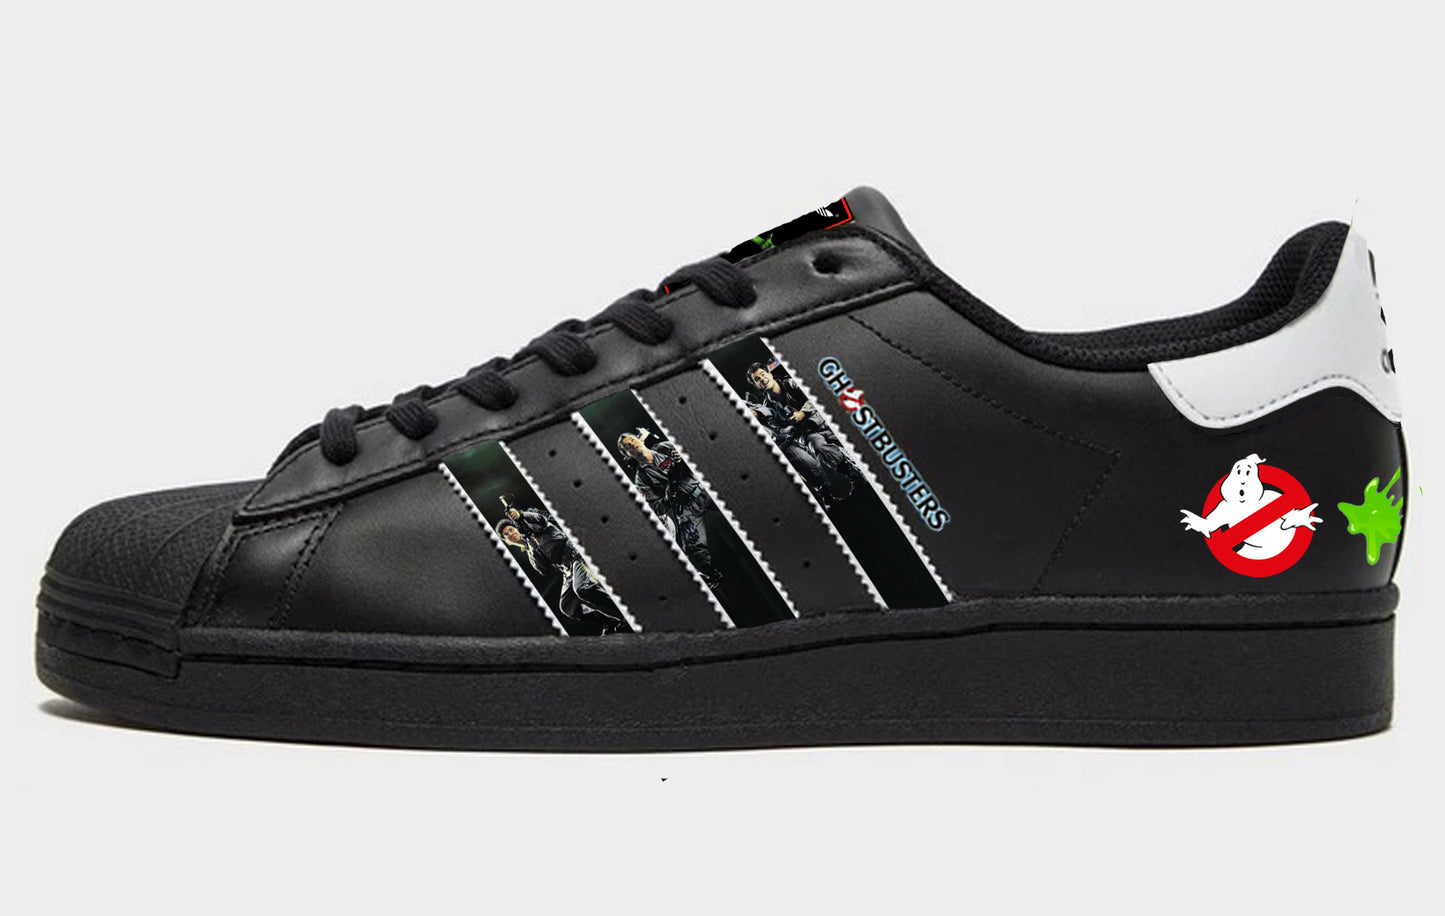 Limited edition Ghostbusters Black Adidas Superstar trainers / sneakers